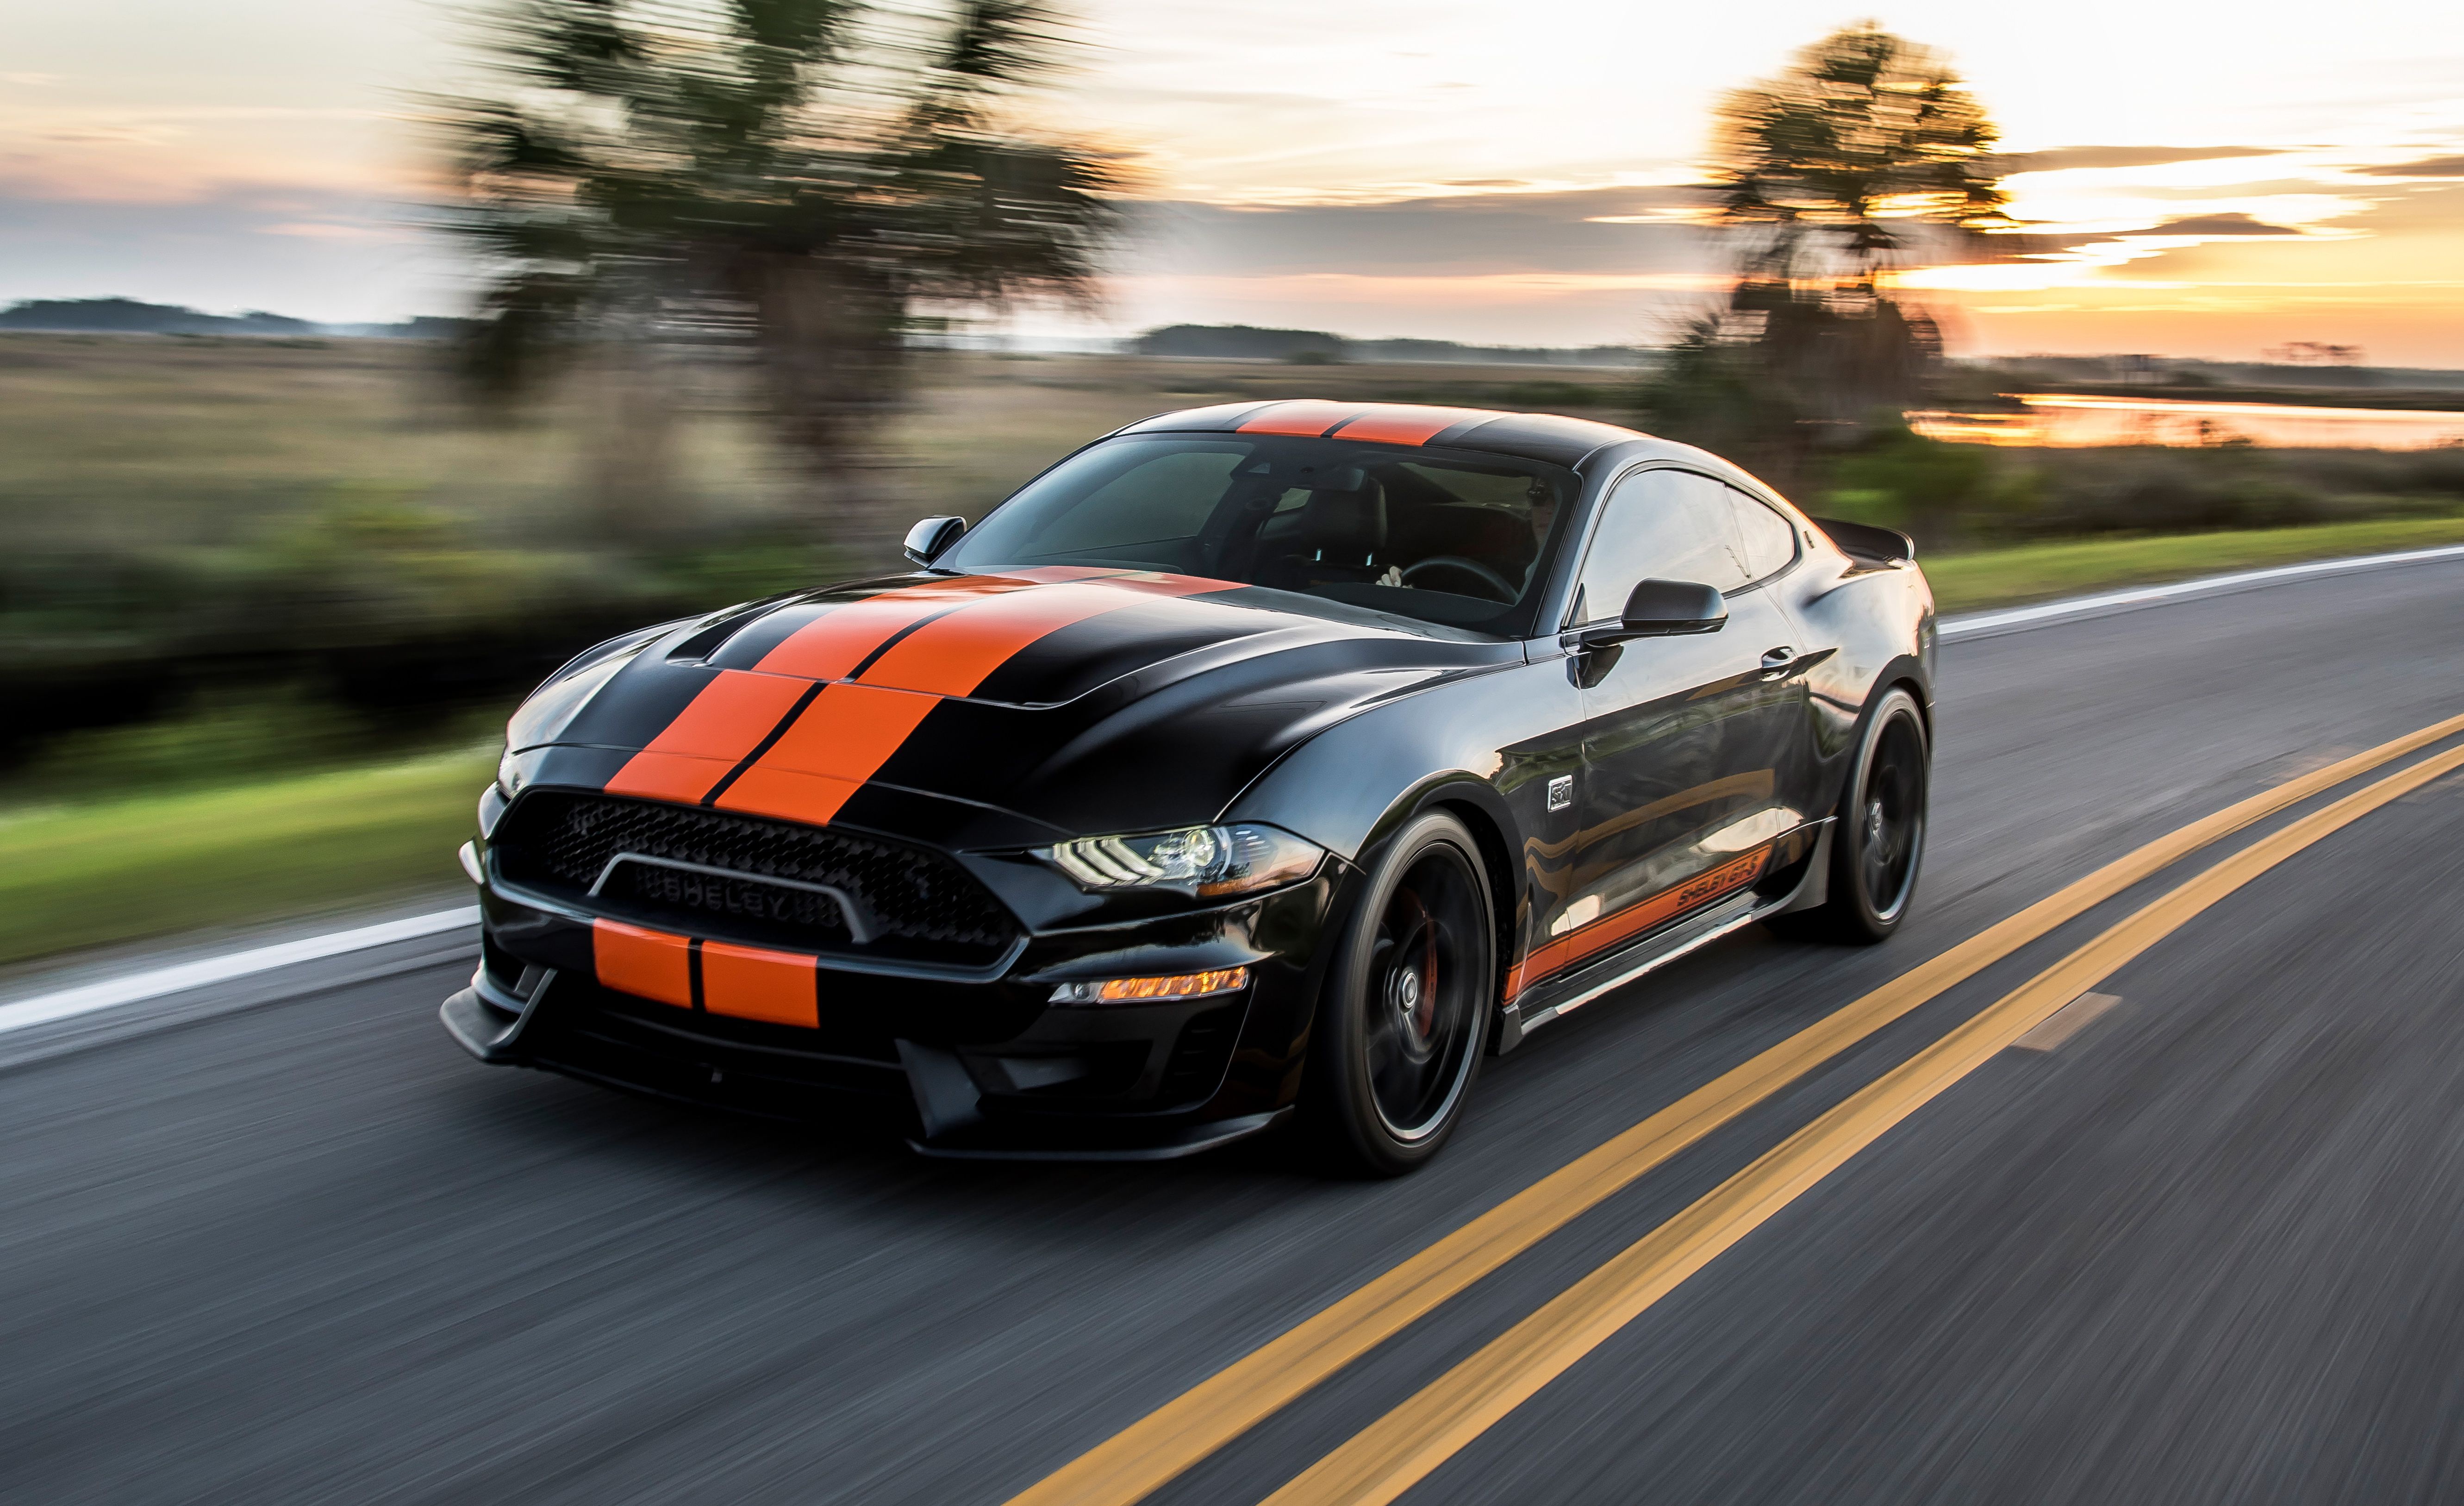 Free download wallpaper Ford, Car, Ford Mustang, Muscle Car, Vehicles, Black Car, Ford Mustang Shelby Gt, Ford Mustang Shelby on your PC desktop